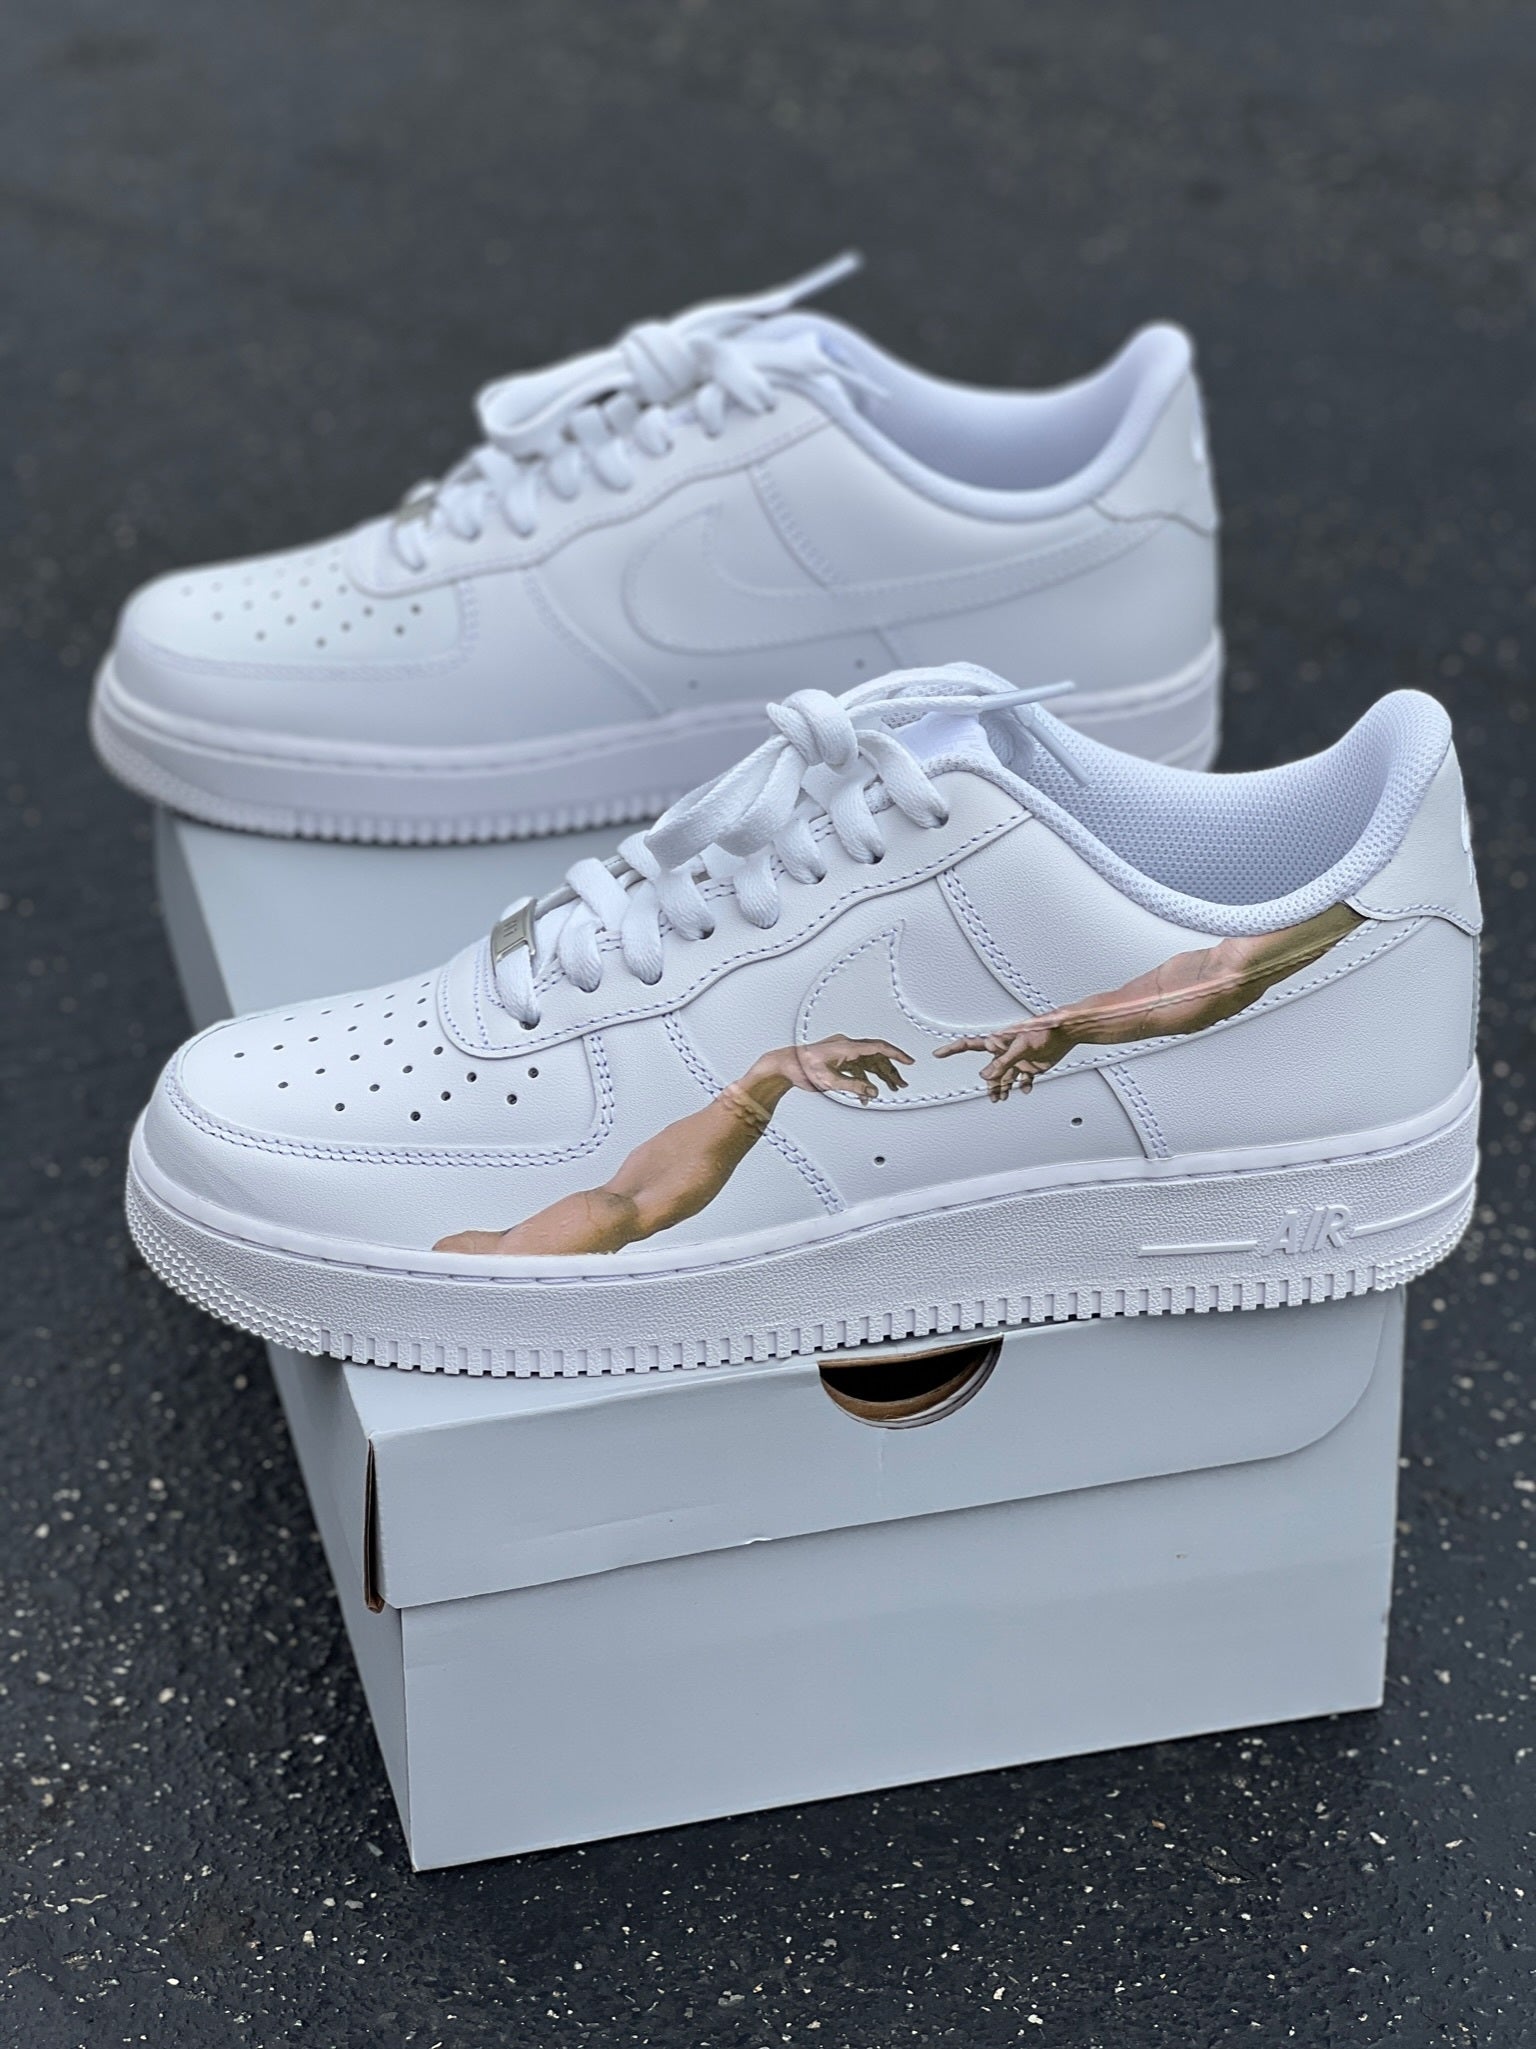 Custom Air Force 1 Painted Nike Af1 Trainers Shoes White Grey -  Israel